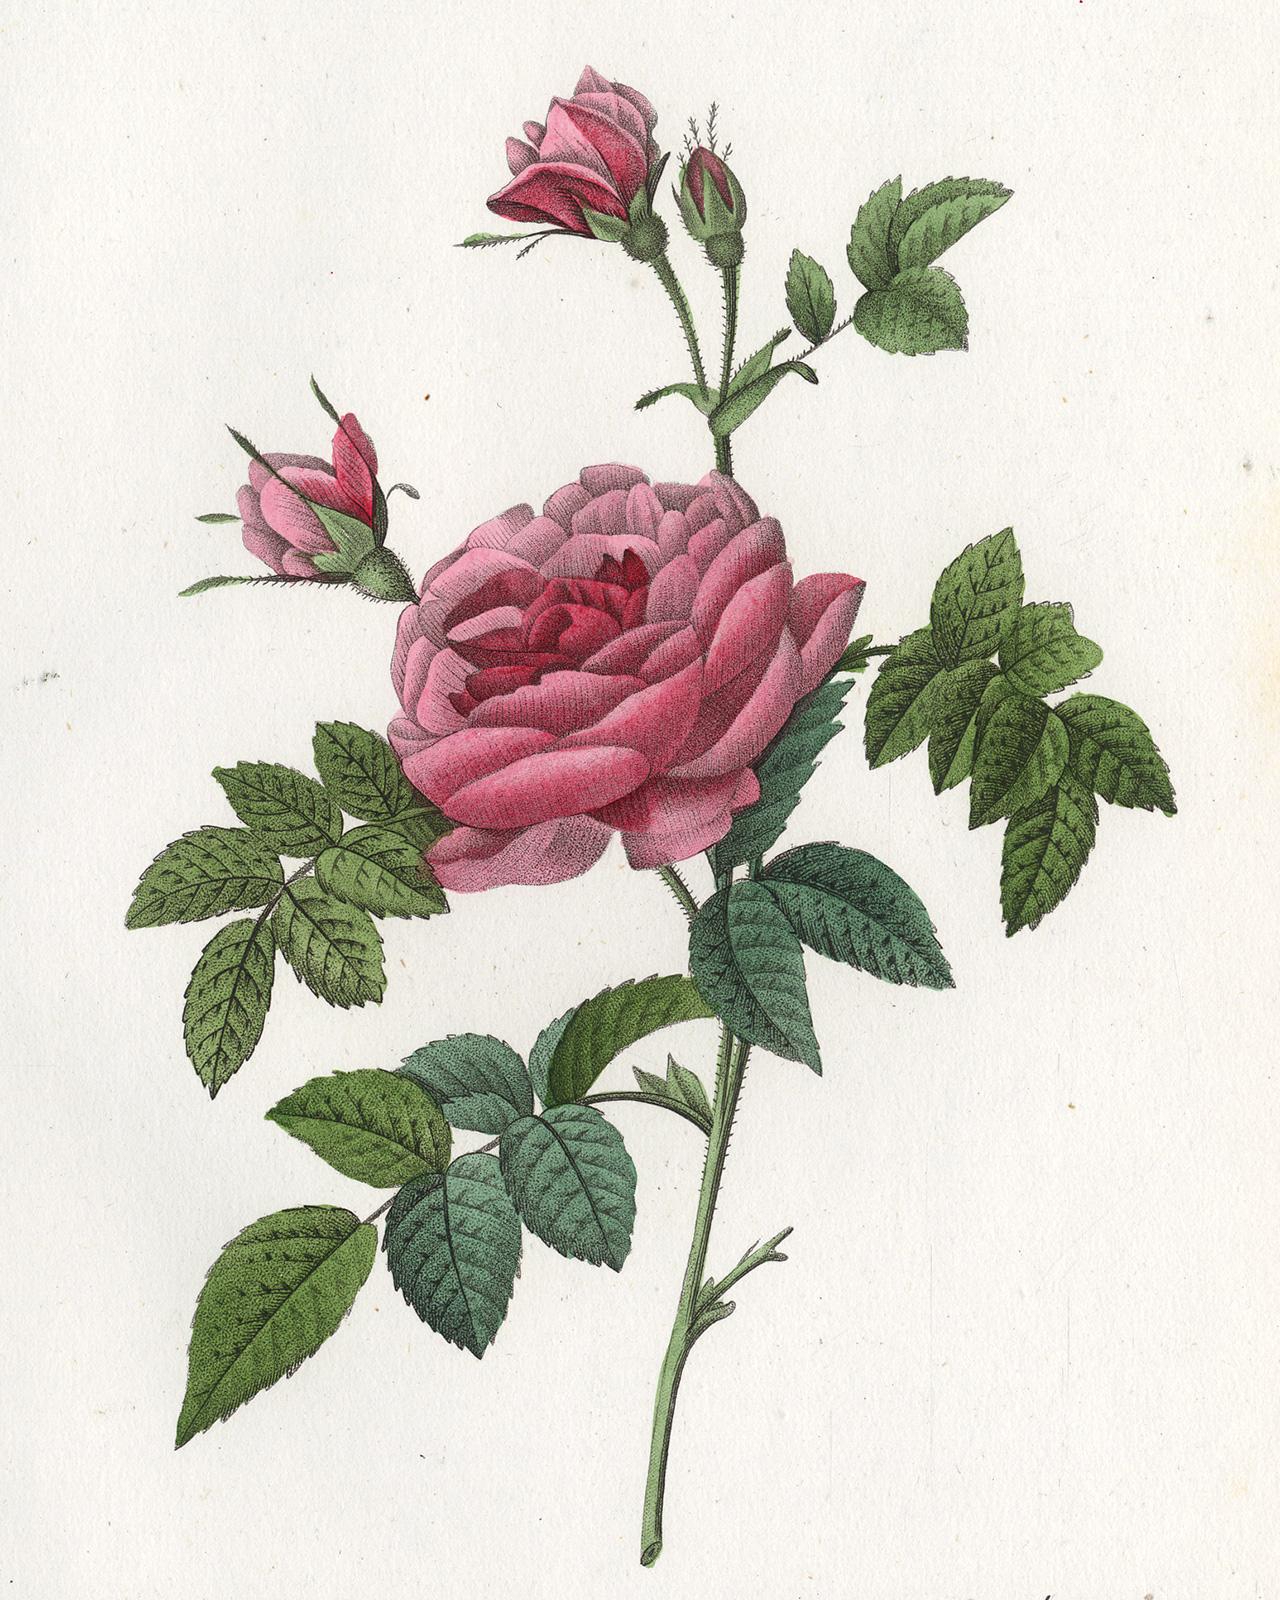 Rosa Turbinata by Redoute - Les Roses - Handcoloured engraving - 19th century - Print by Pierre-Joseph Redouté